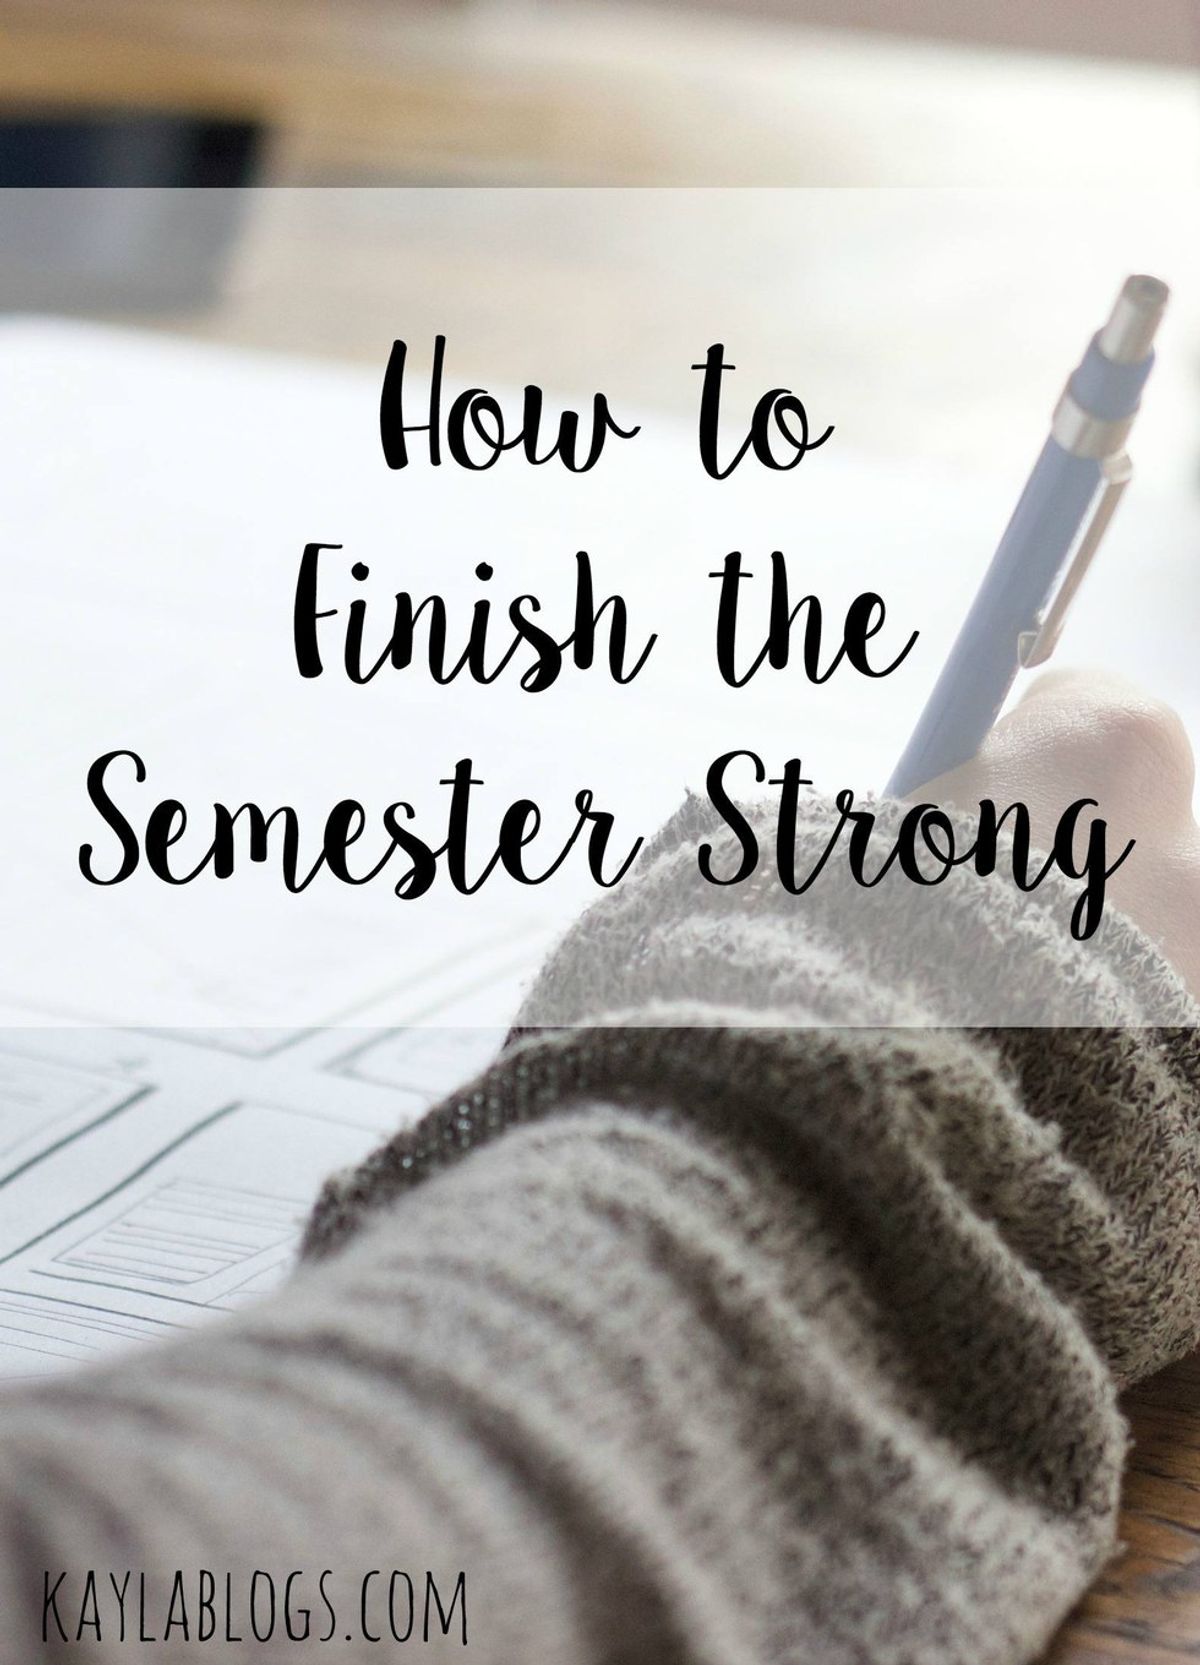 How To: Finish The Semester Strong